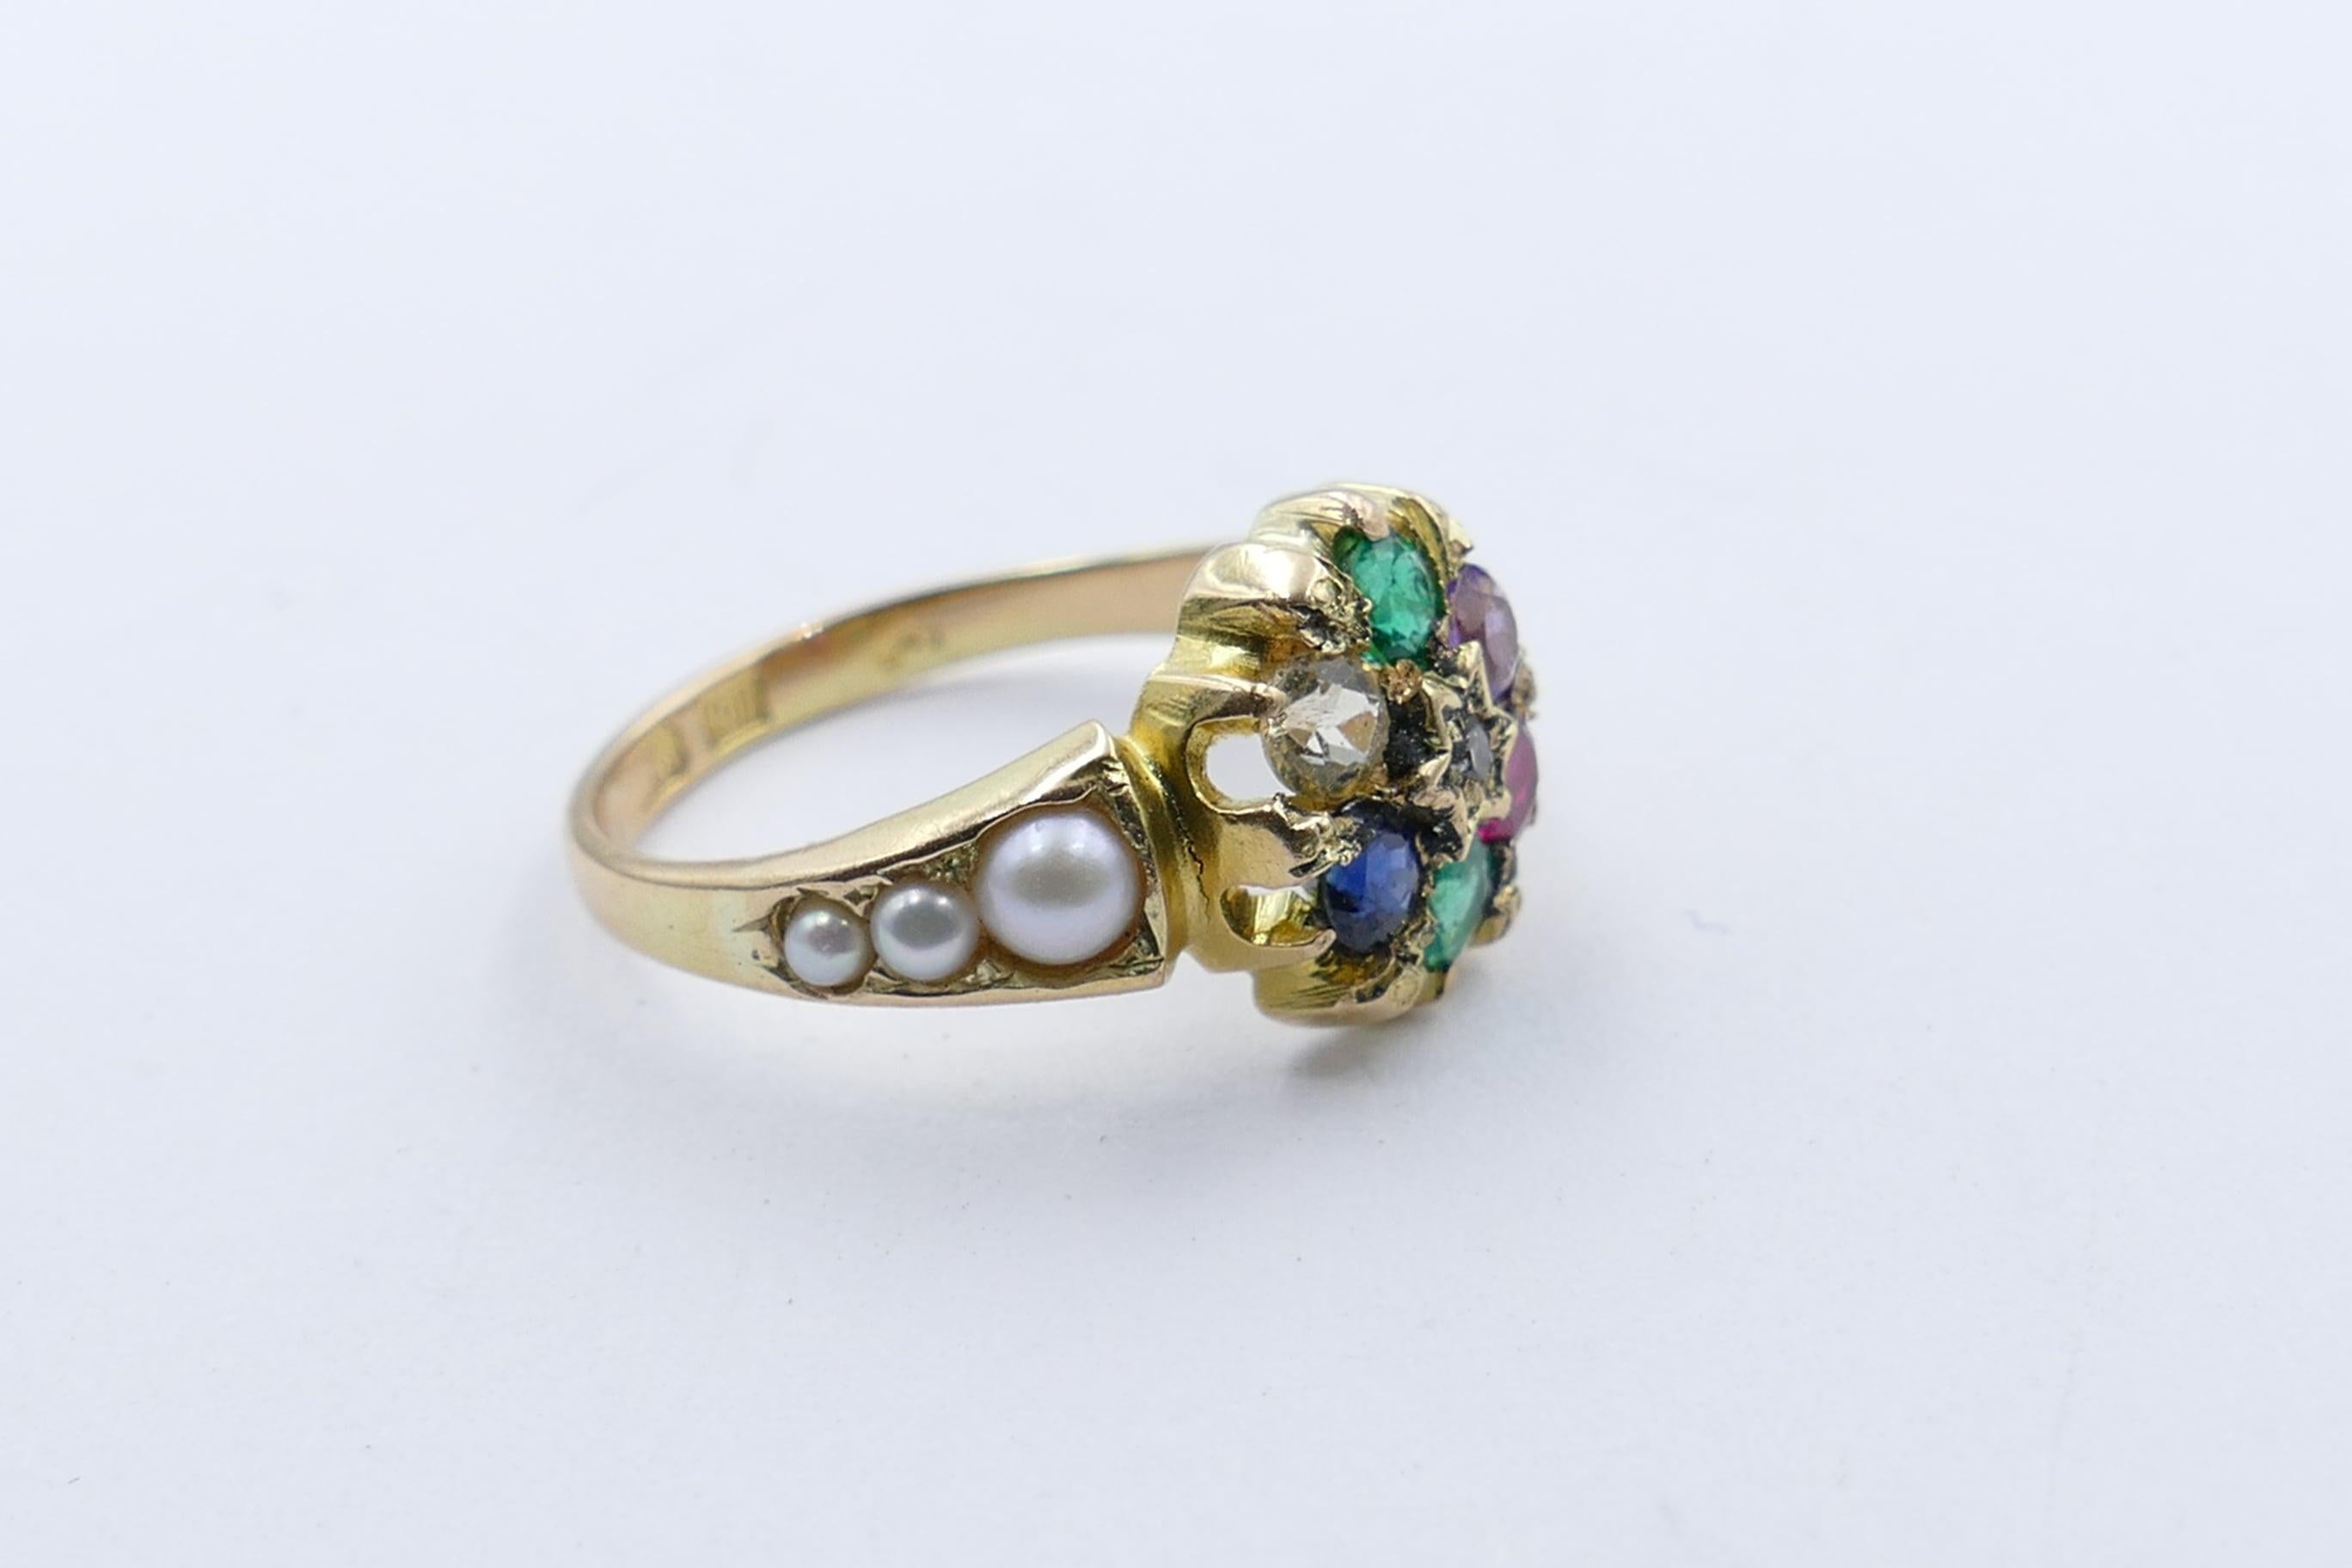 This beautifully preserved Antique Ring has been closely fashioned along the lines of the very popular Victorian tradition of setting the stones to 